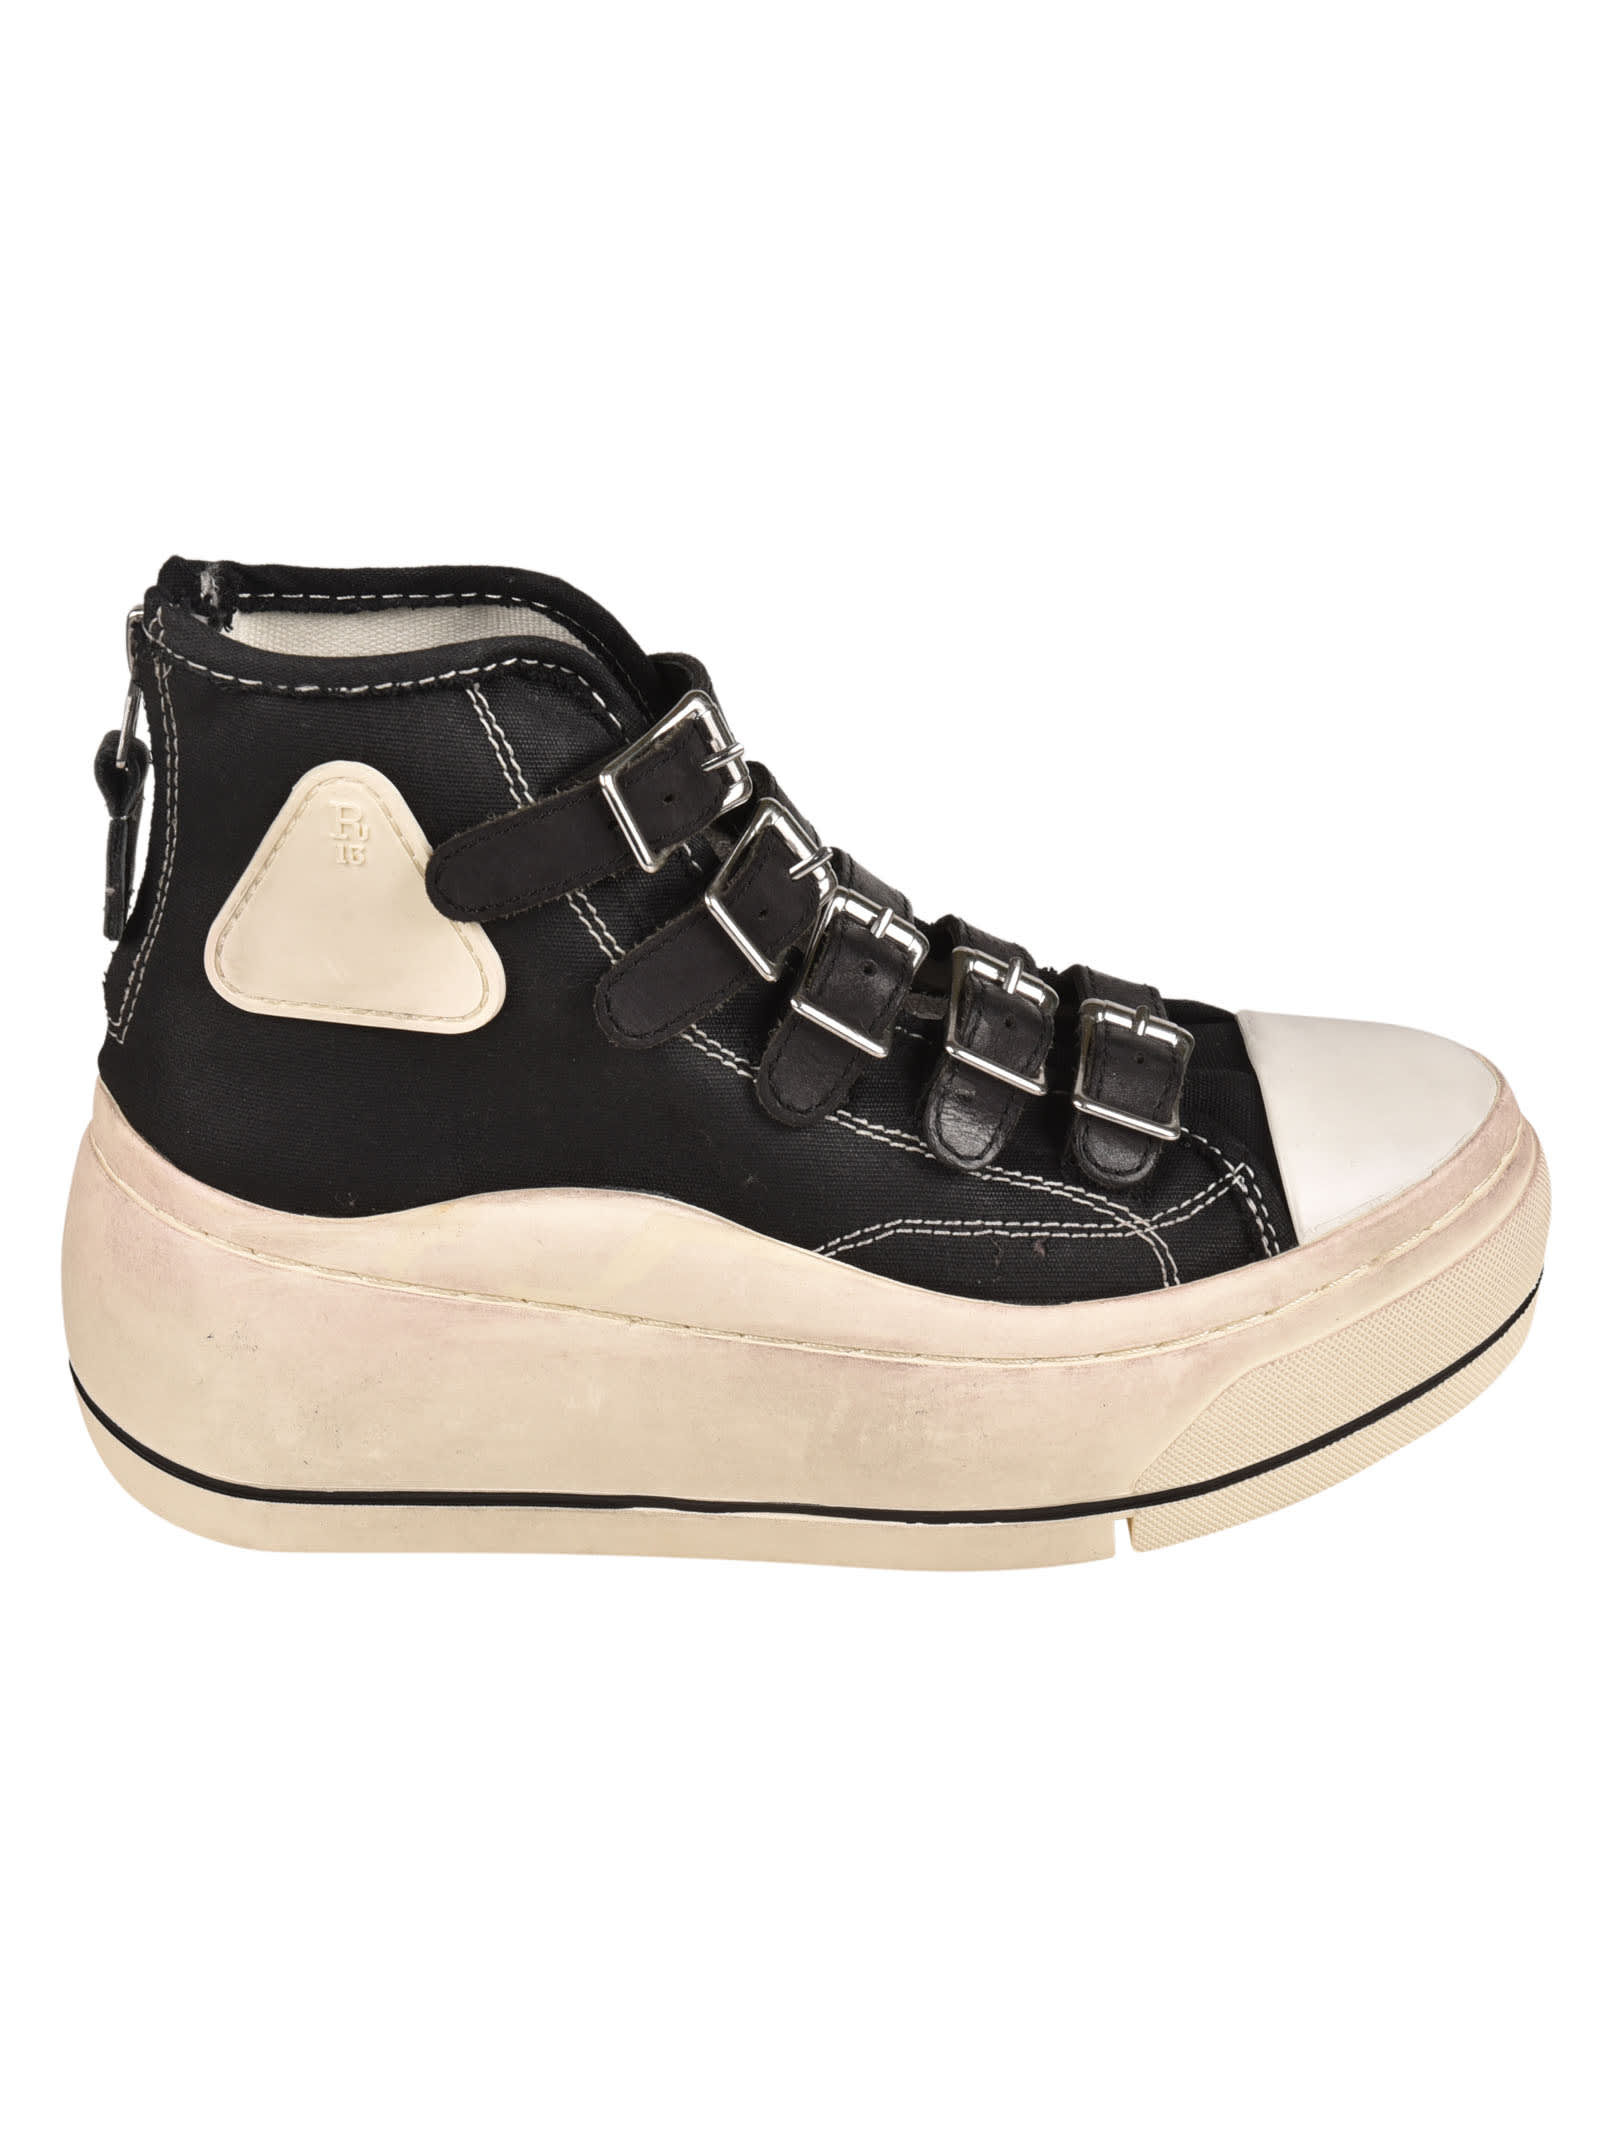 R13 Buckle Lace Free Kurt High Top Sneakers